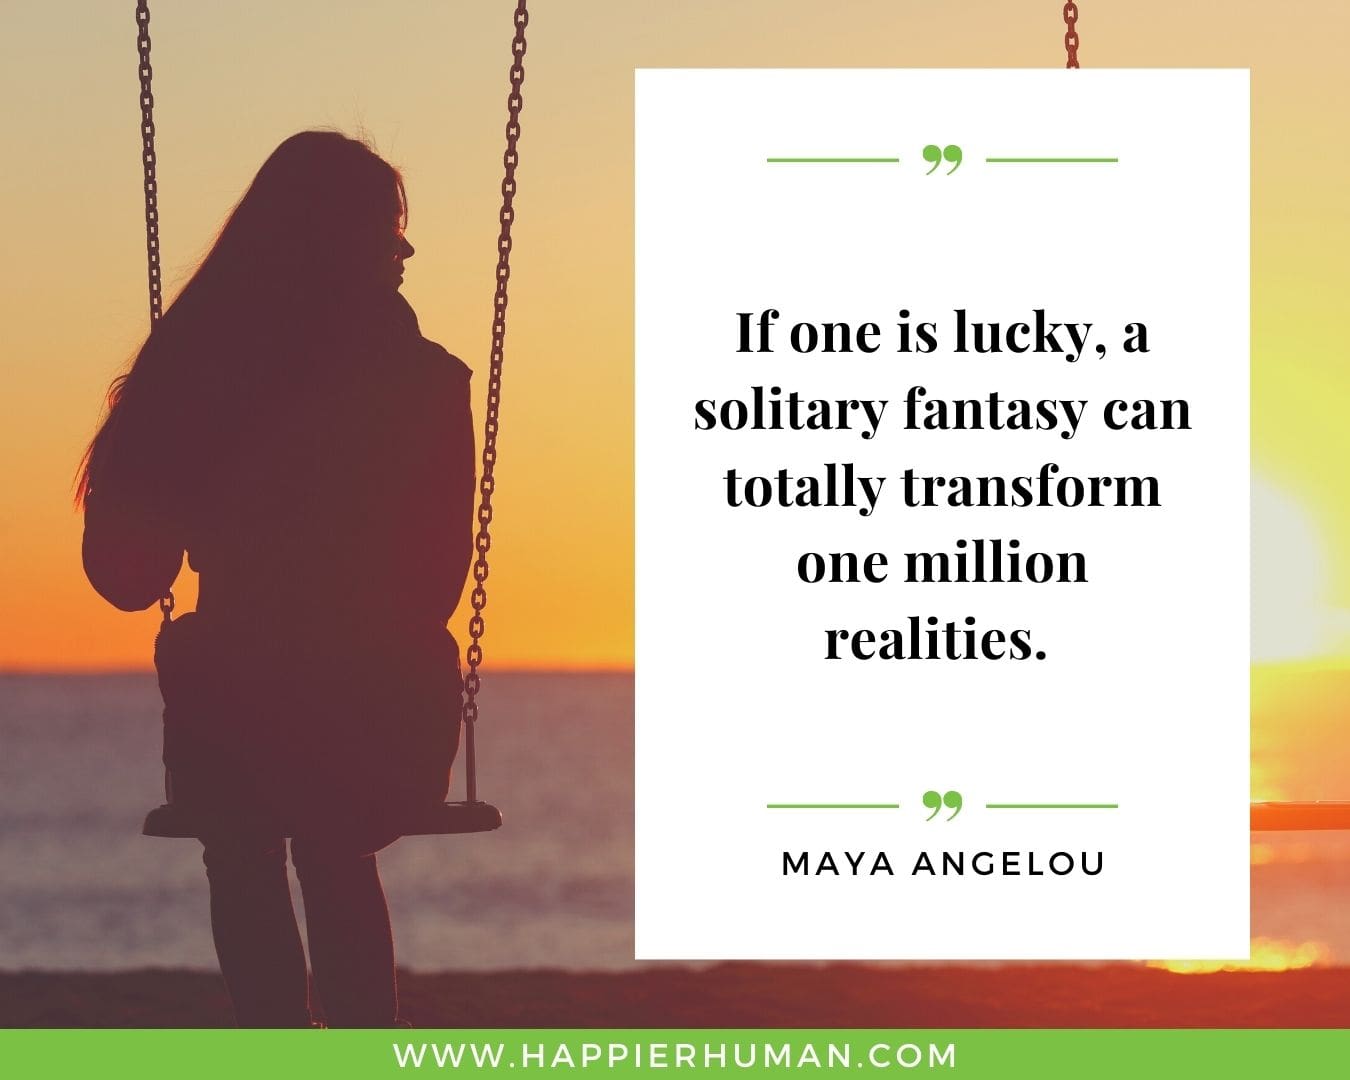 Loneliness Quotes - “If one is lucky, a solitary fantasy can totally transform one million realities.” – Maya Angelou